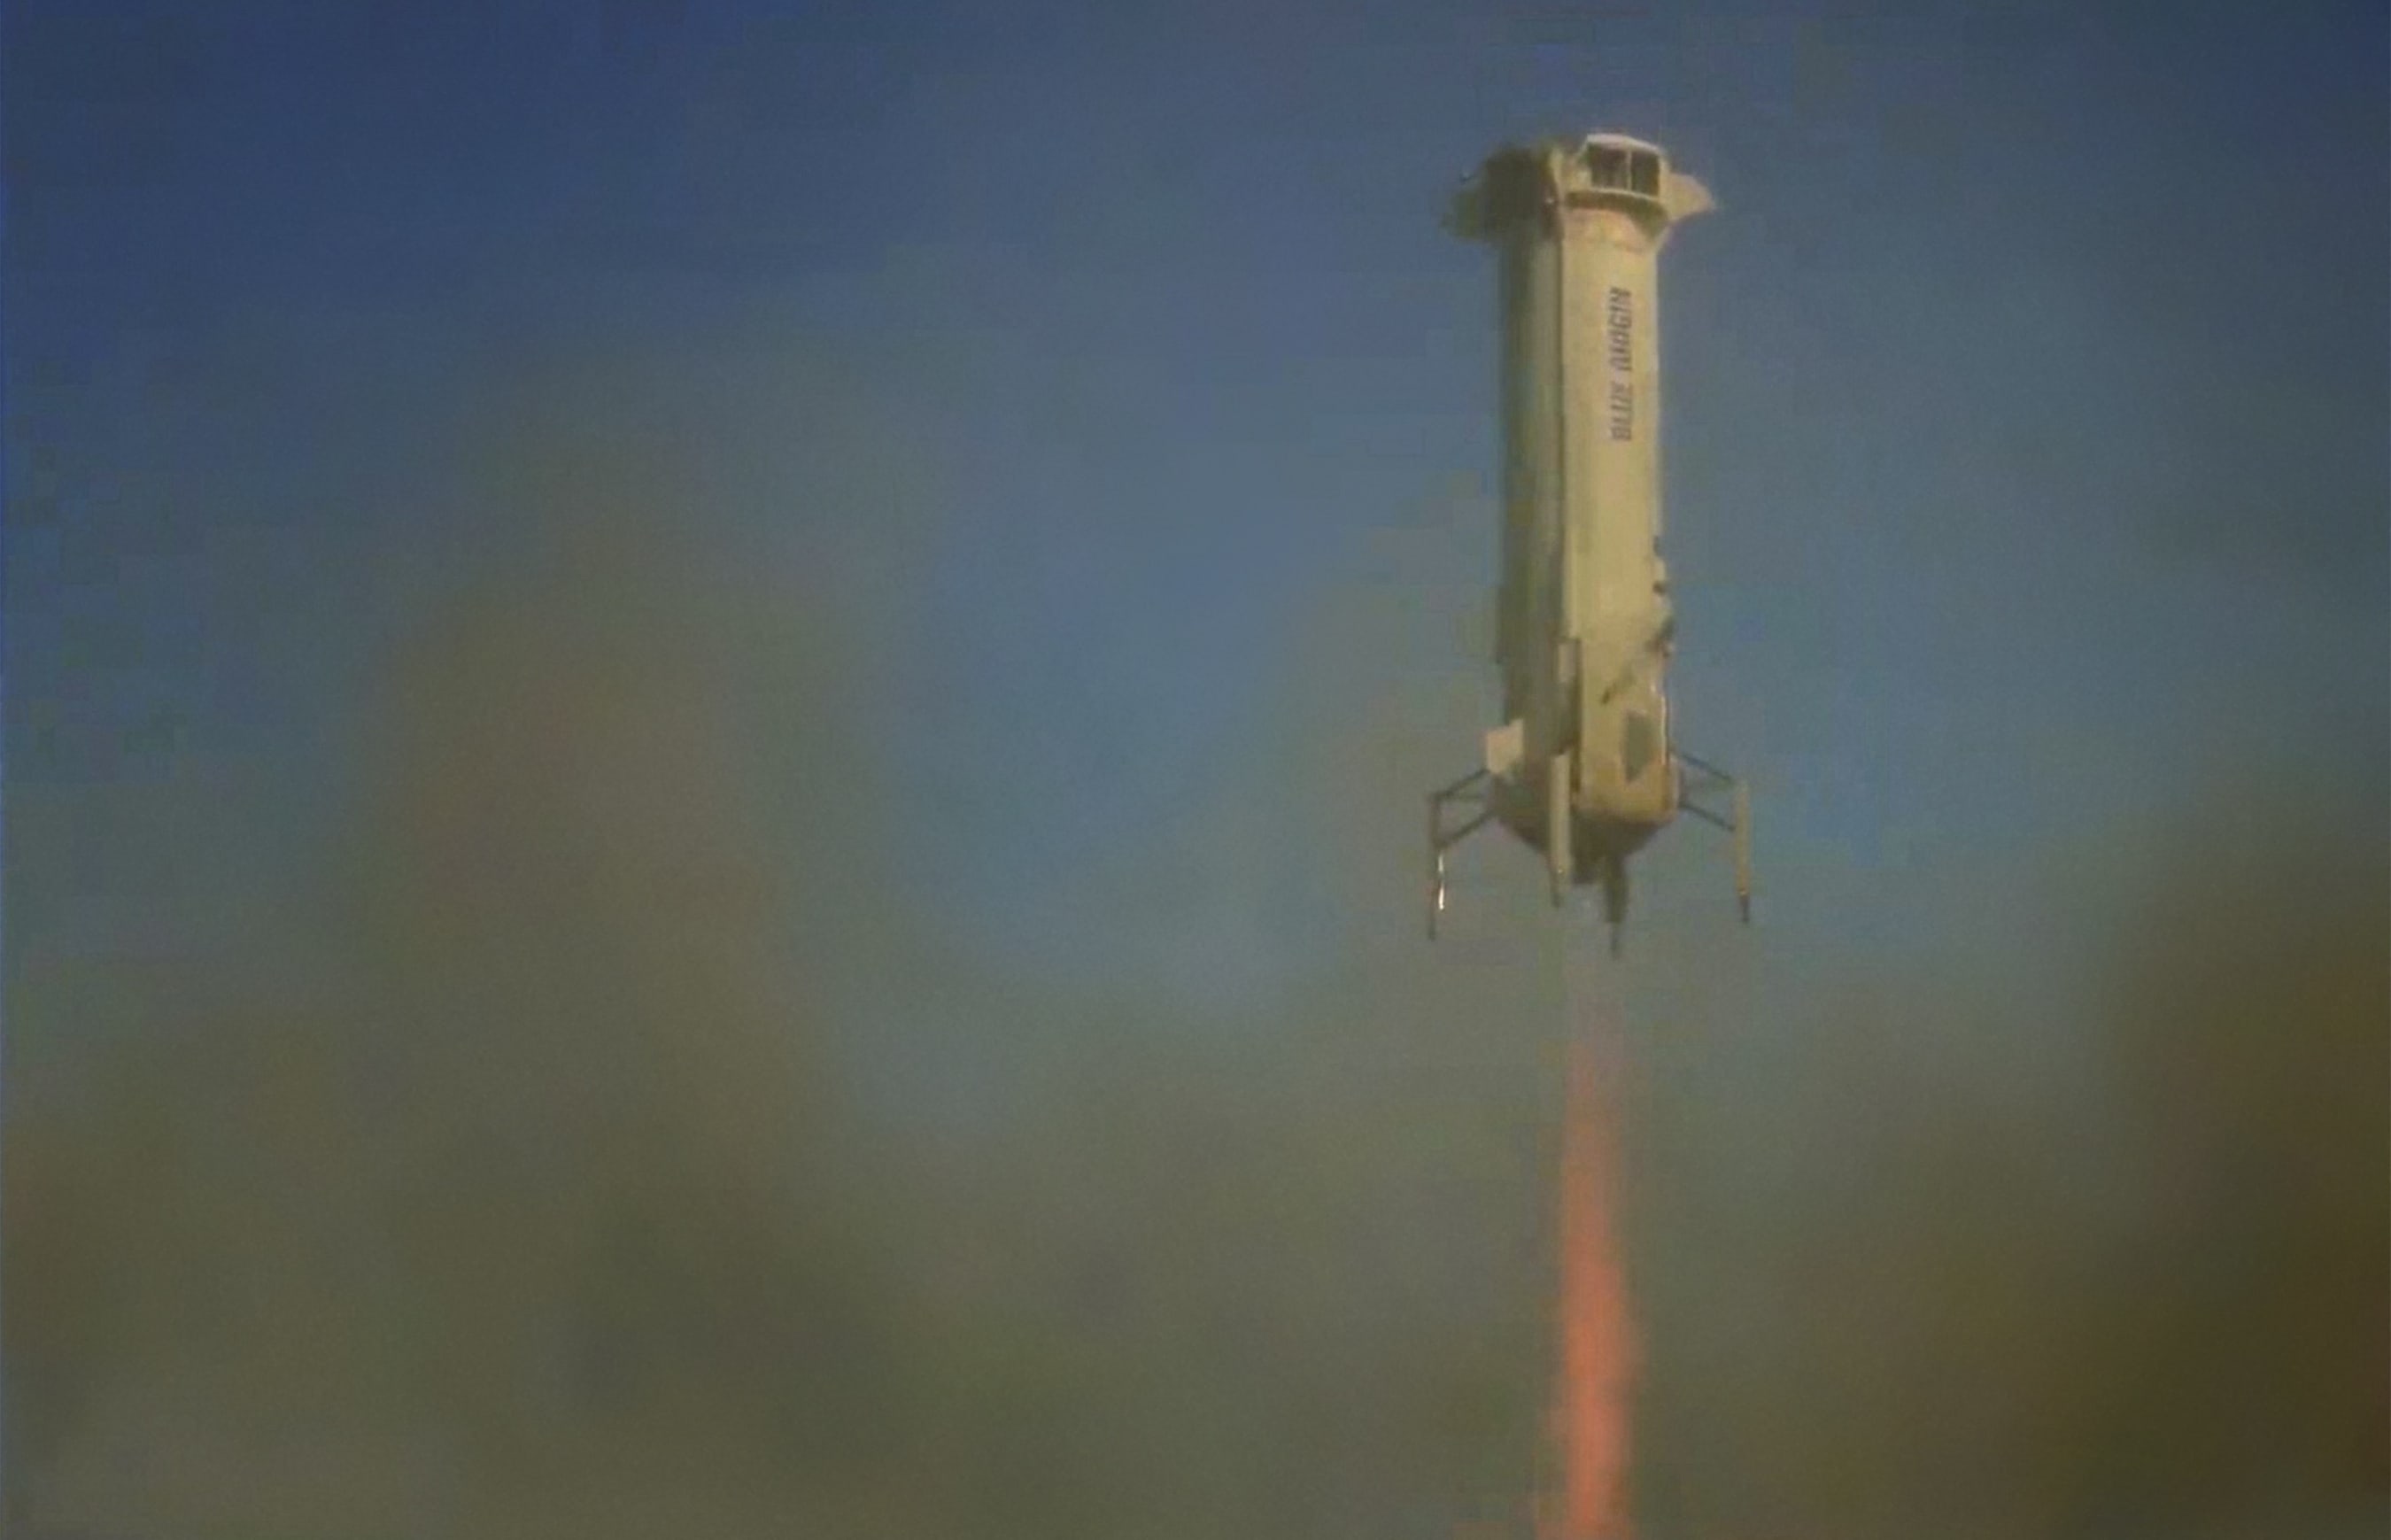 This Blue Origin handout photo shows New Shepard landing in West Texas on 13 October, 2020, with the NASA Lunar Landing Sensor Demo on board.